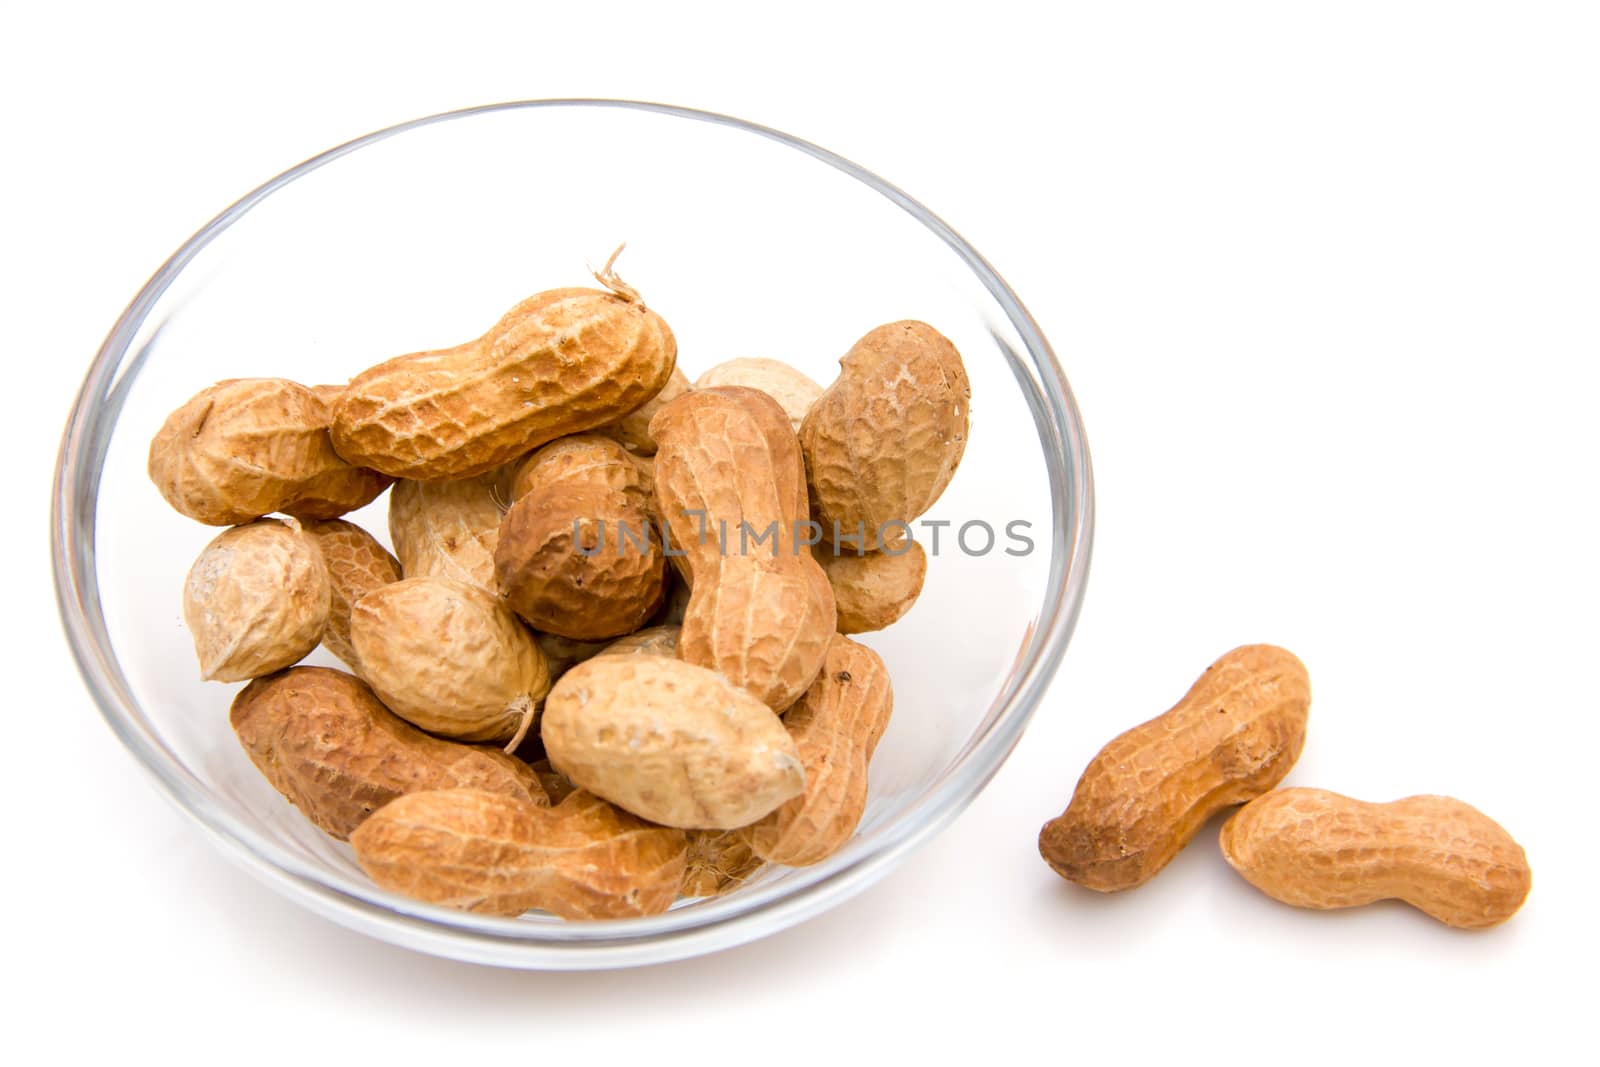 Peanuts on bowl by spafra